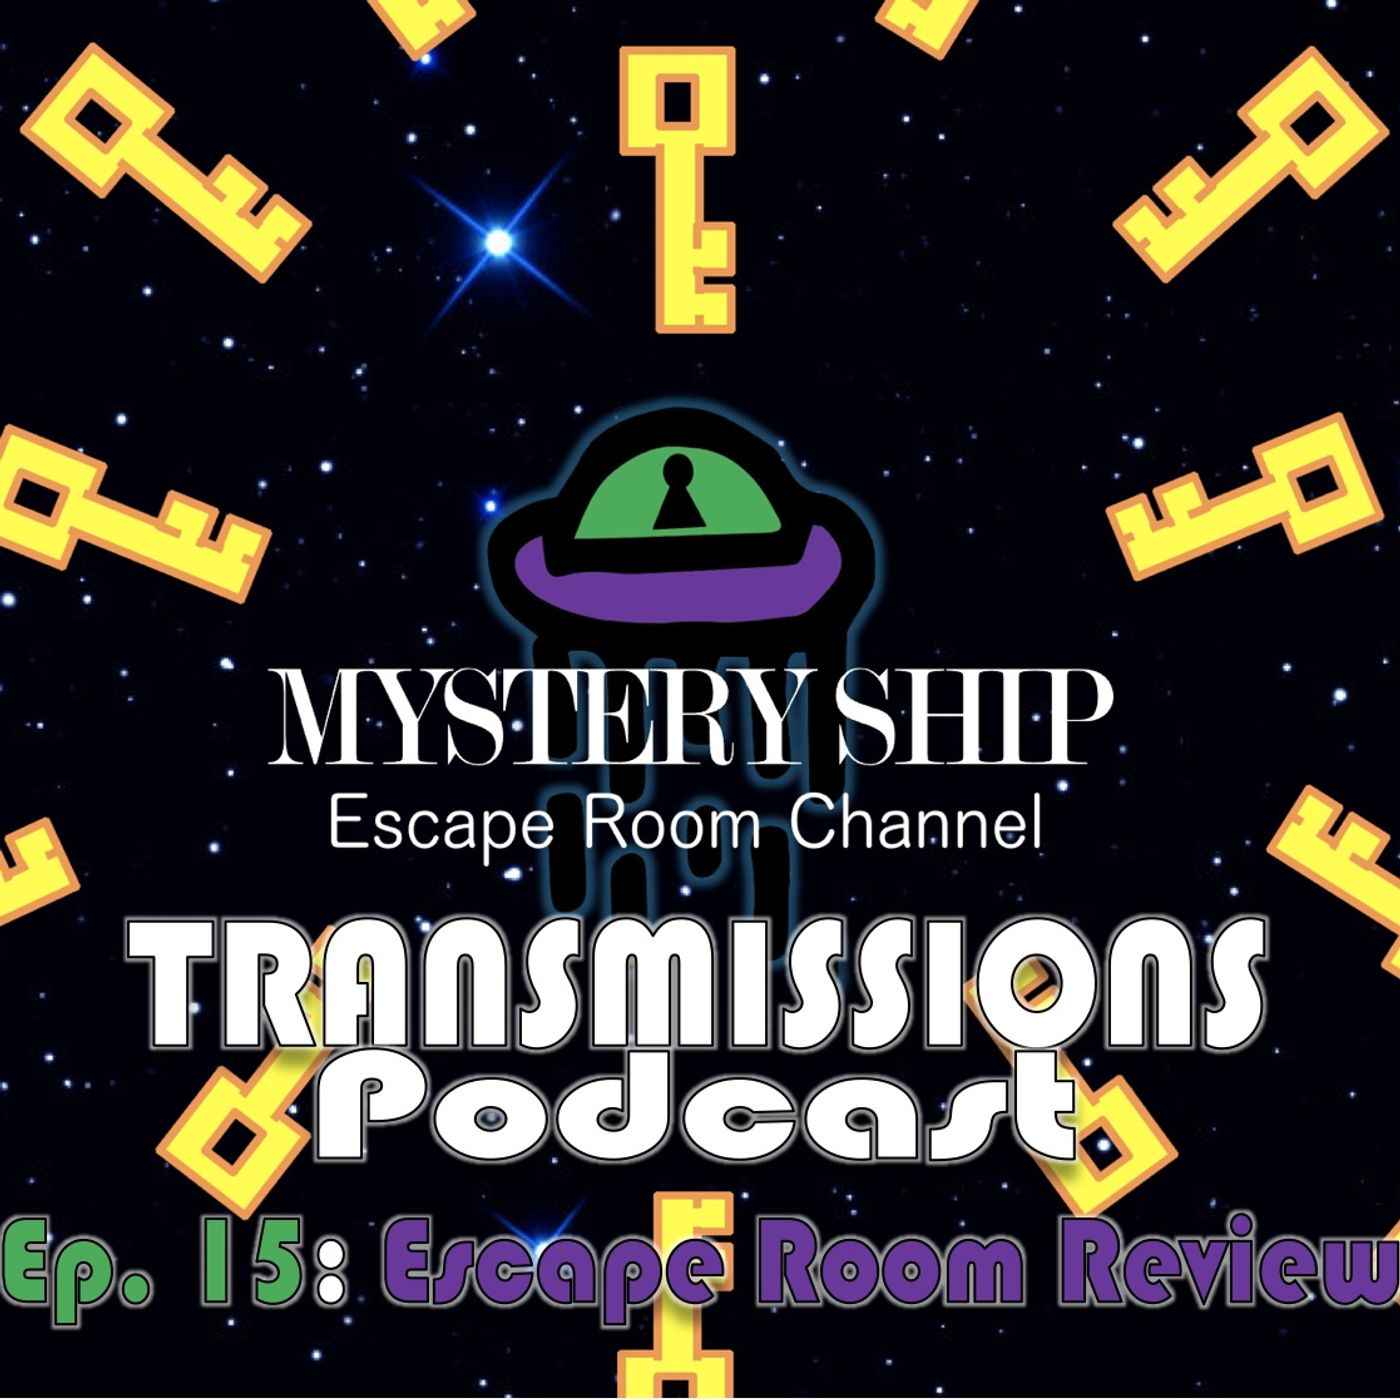 Ep15 Escape Room Review: Grandma's Master Plan - Mystery Ship Transmissions Podcast